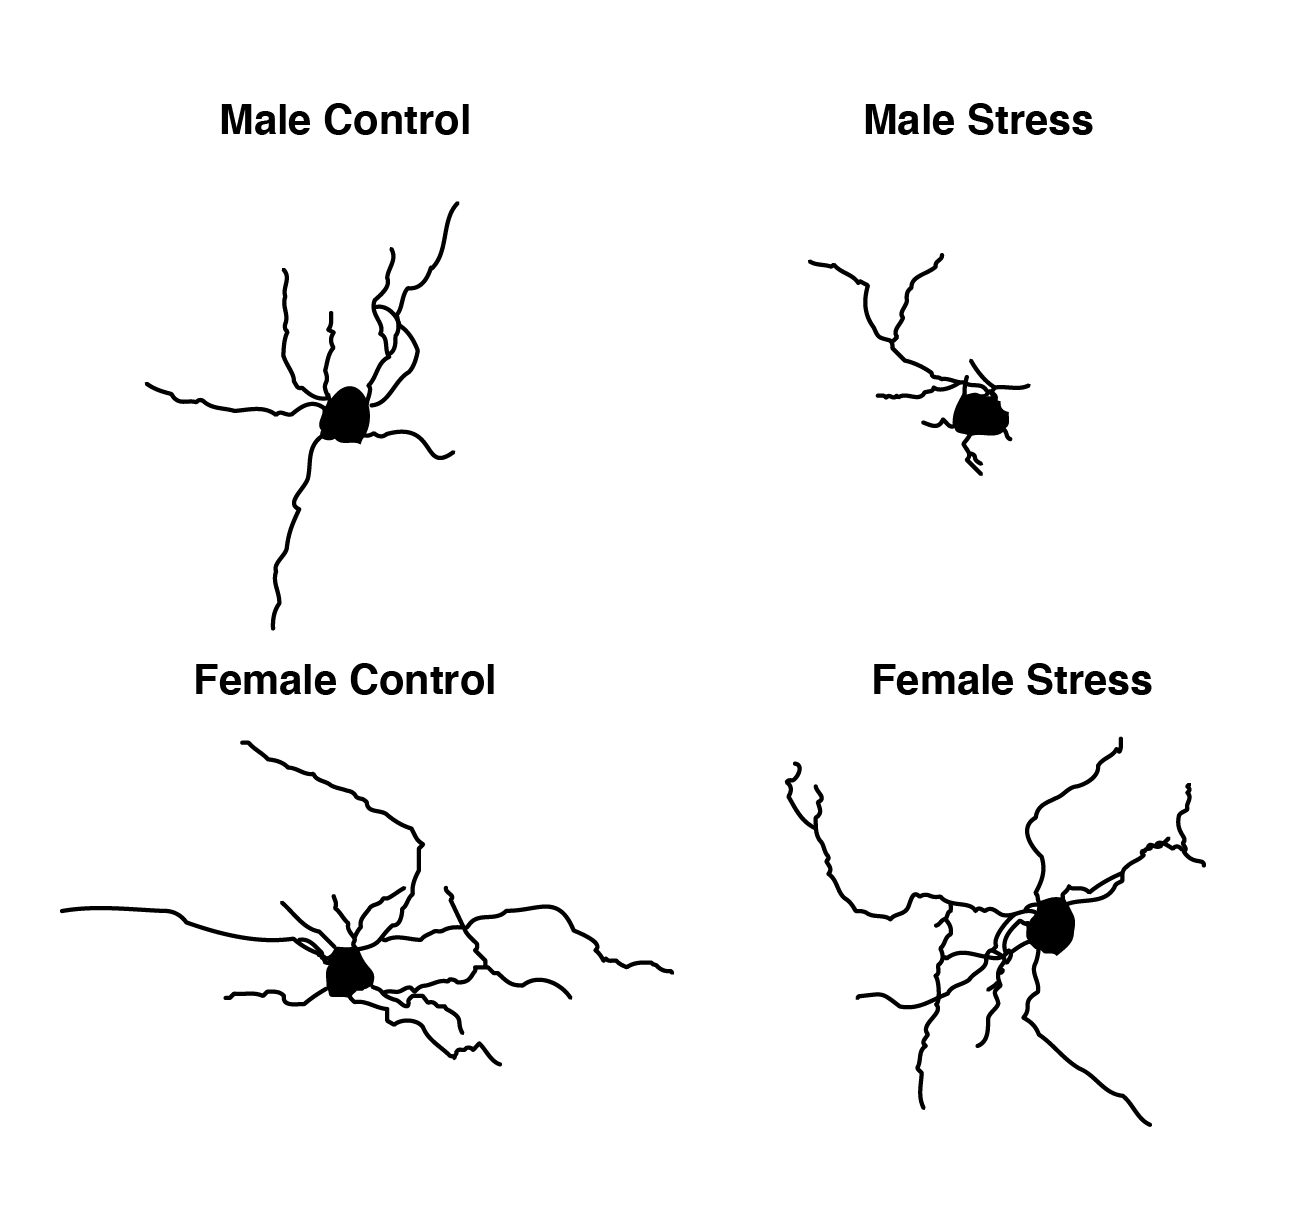 Brain Cells Of Males And Females Respond Differently To Chronic Stress 3